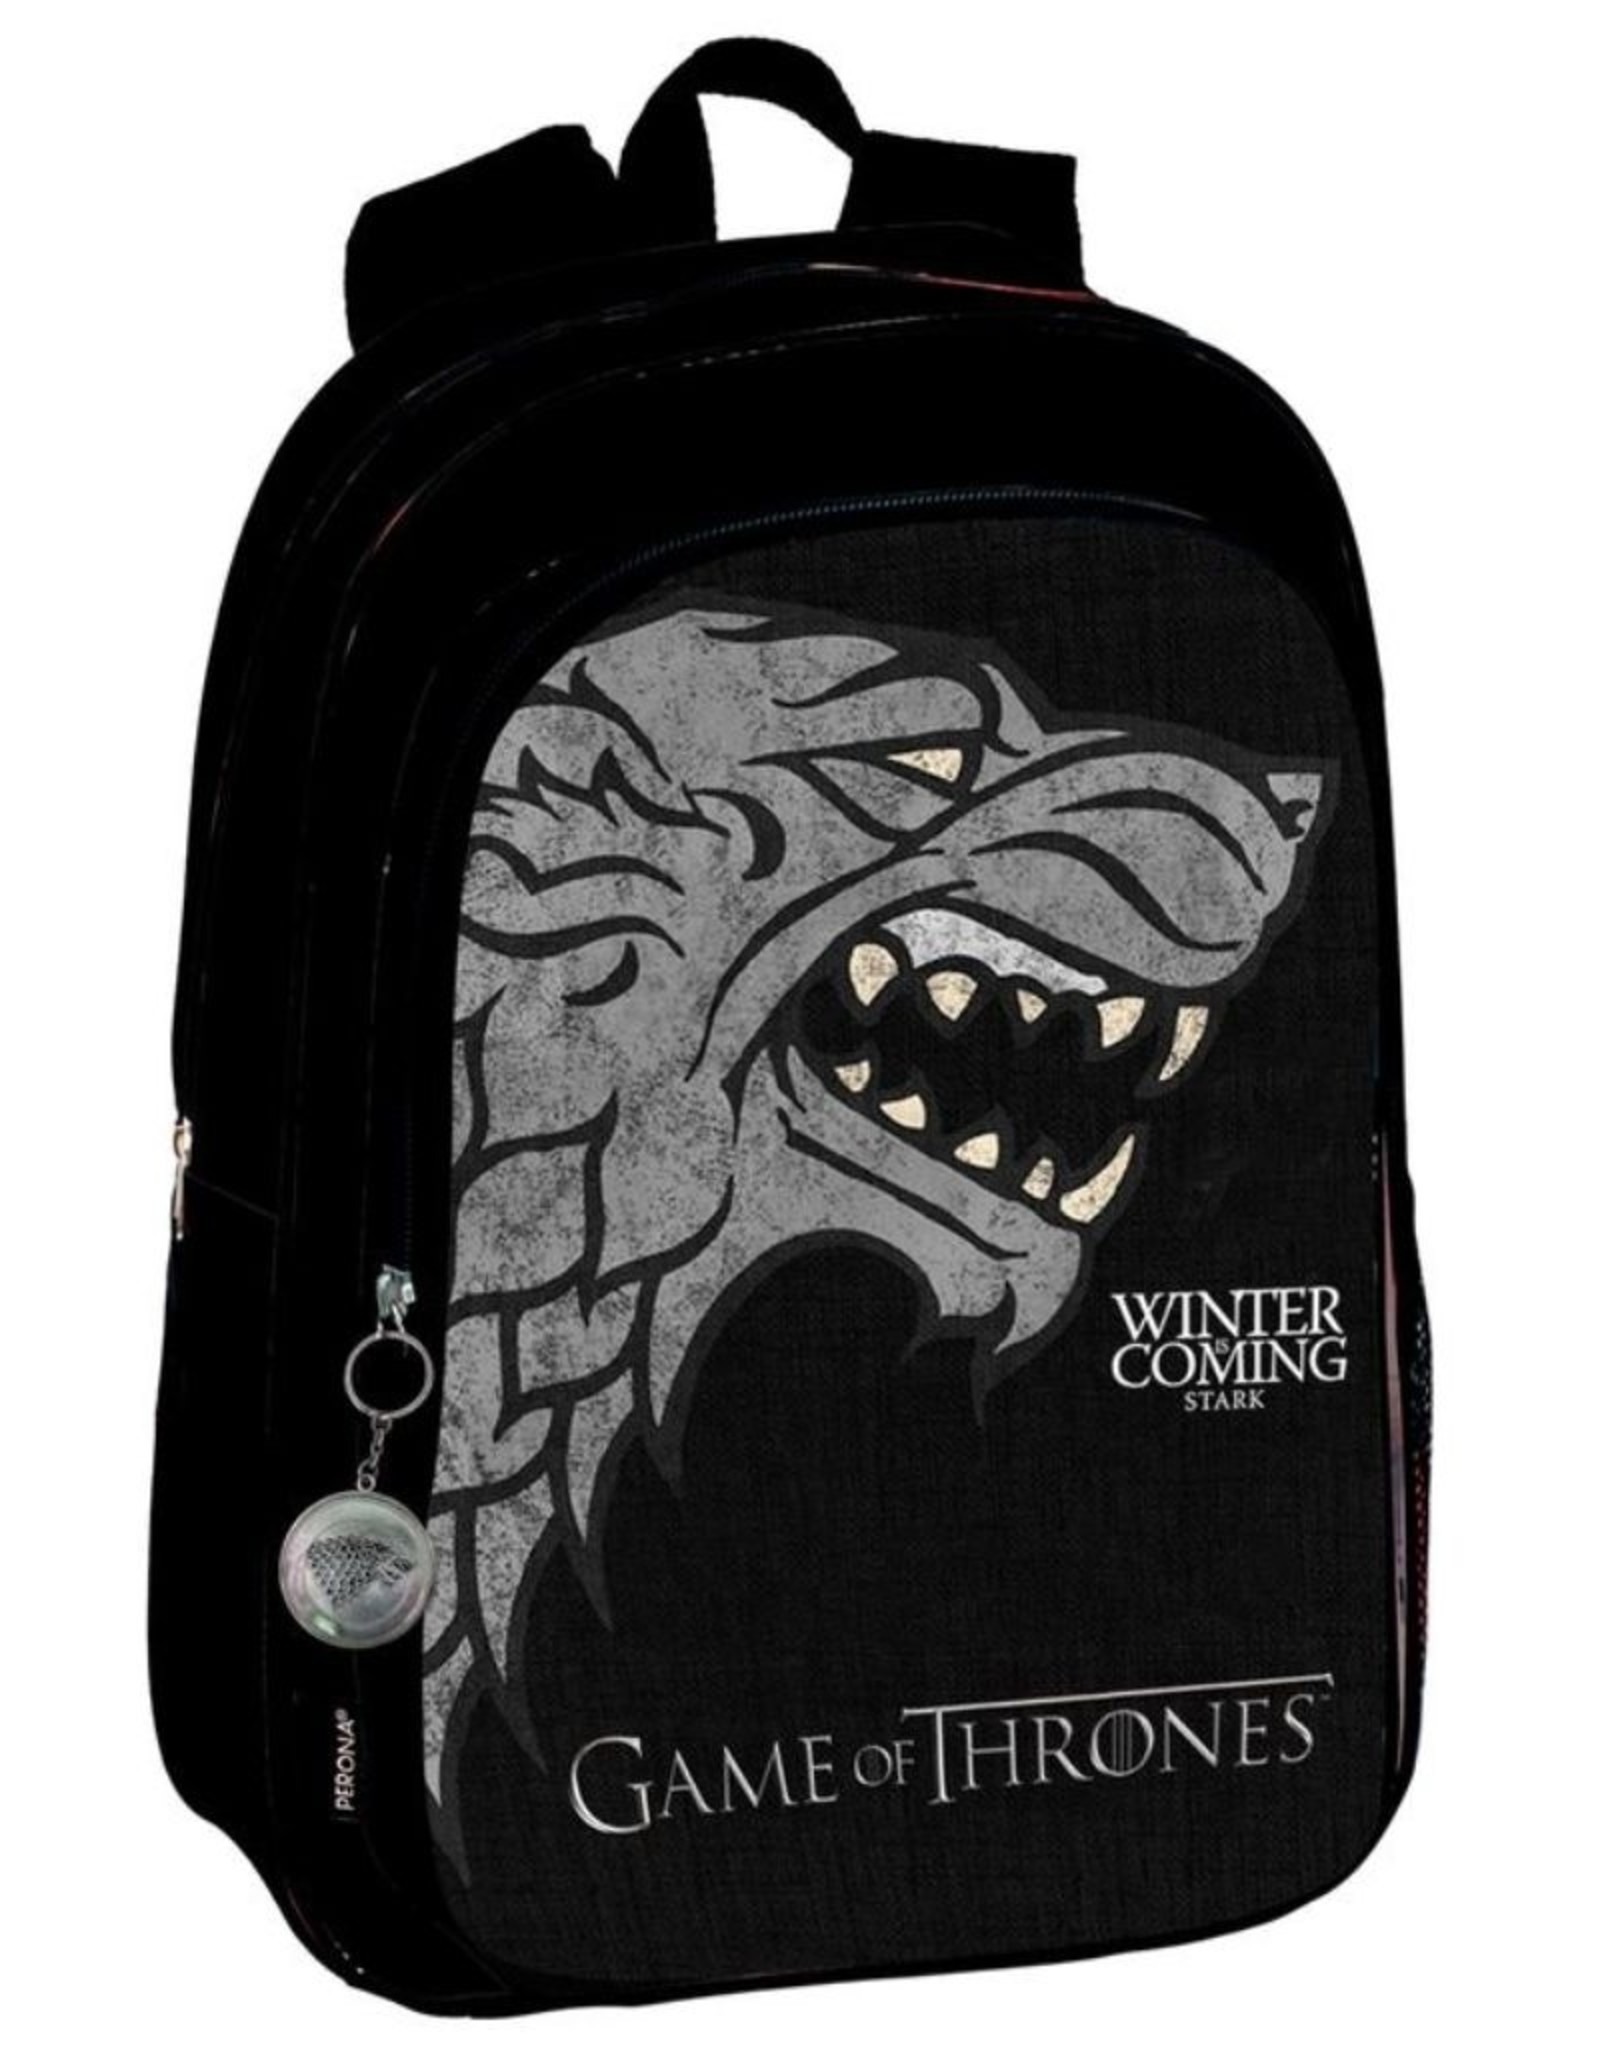 Game of Thrones Other Merchandise backpacks and fanny packs -  Game of Thrones Stark backpack 43cm